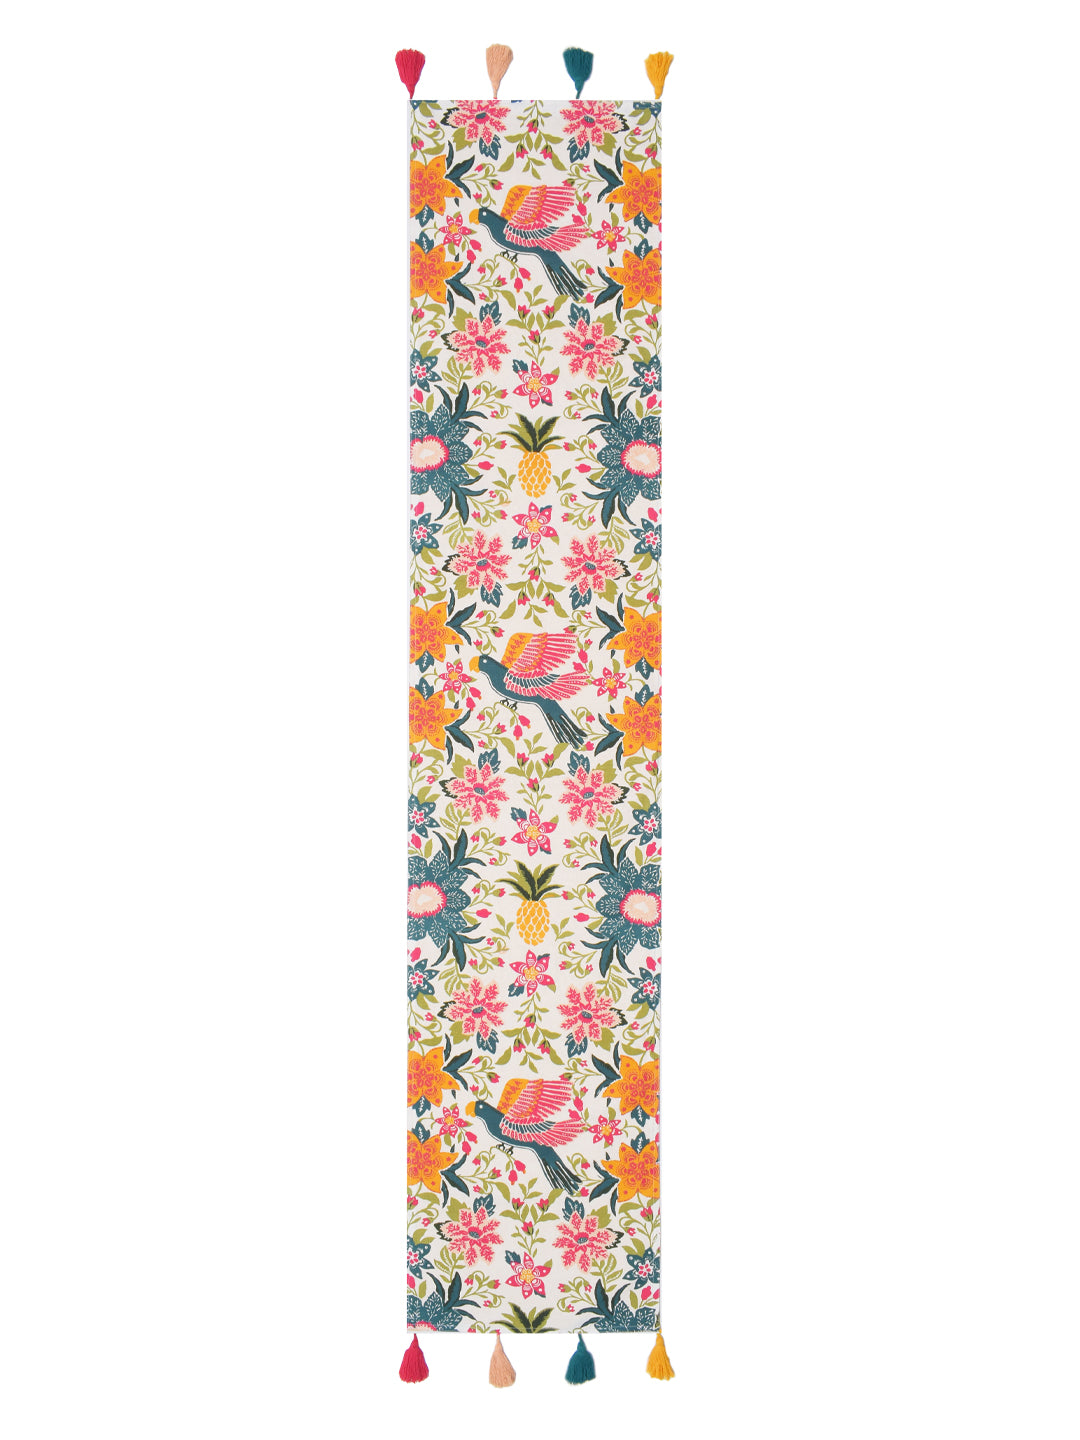 Blanc9 Scrolling Garden Cotton Printed 4/6 Seater Table Runner